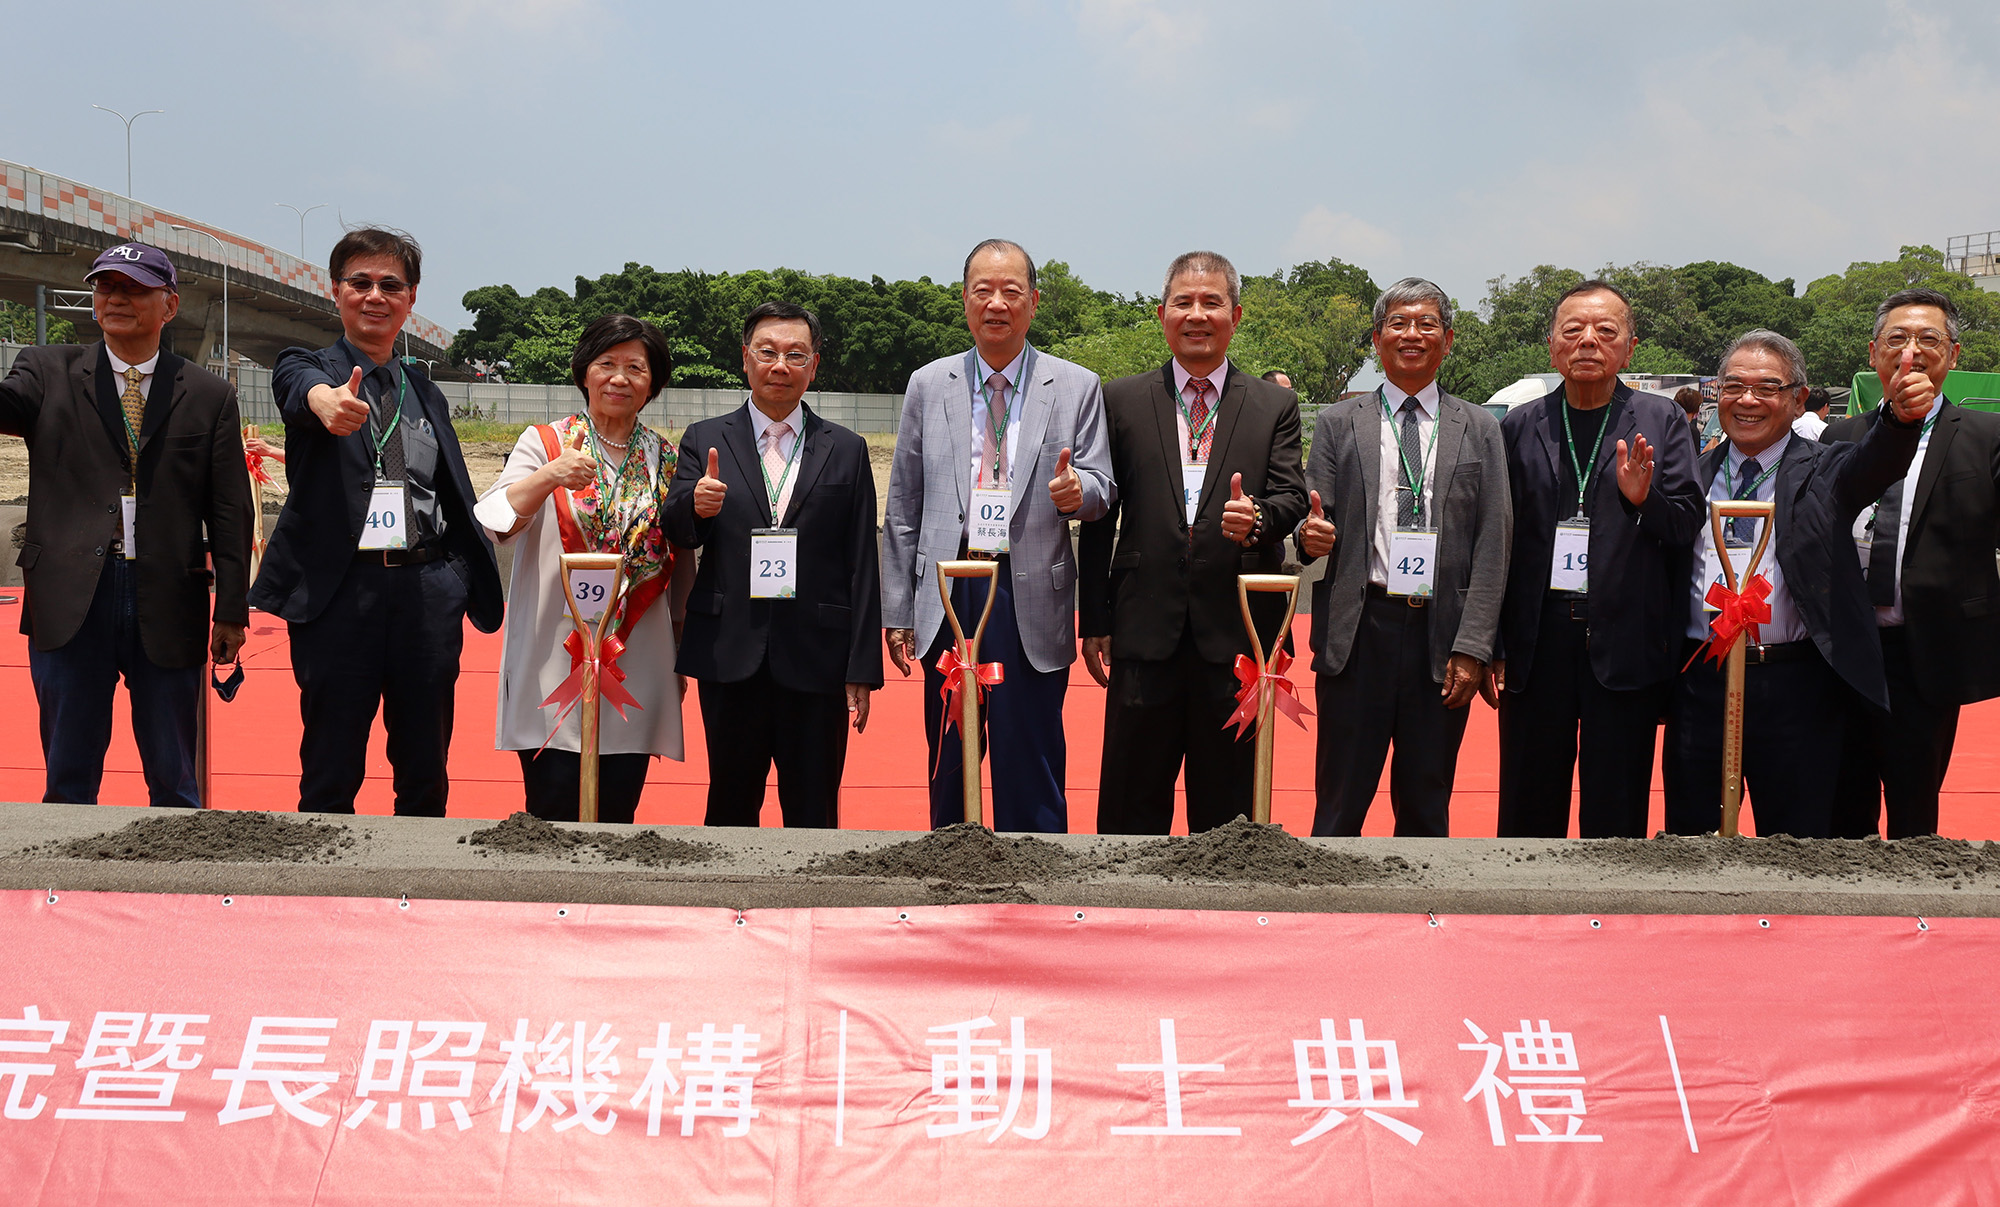 The groundbreaking ceremony of the "Asia University Fengfu Health Park," featuring Chang-Hai Tsai, the founder of Asia University (left 5), President Jeffrey J.P. Tsai of Asia University (left 4), and other faculty members from Asia University